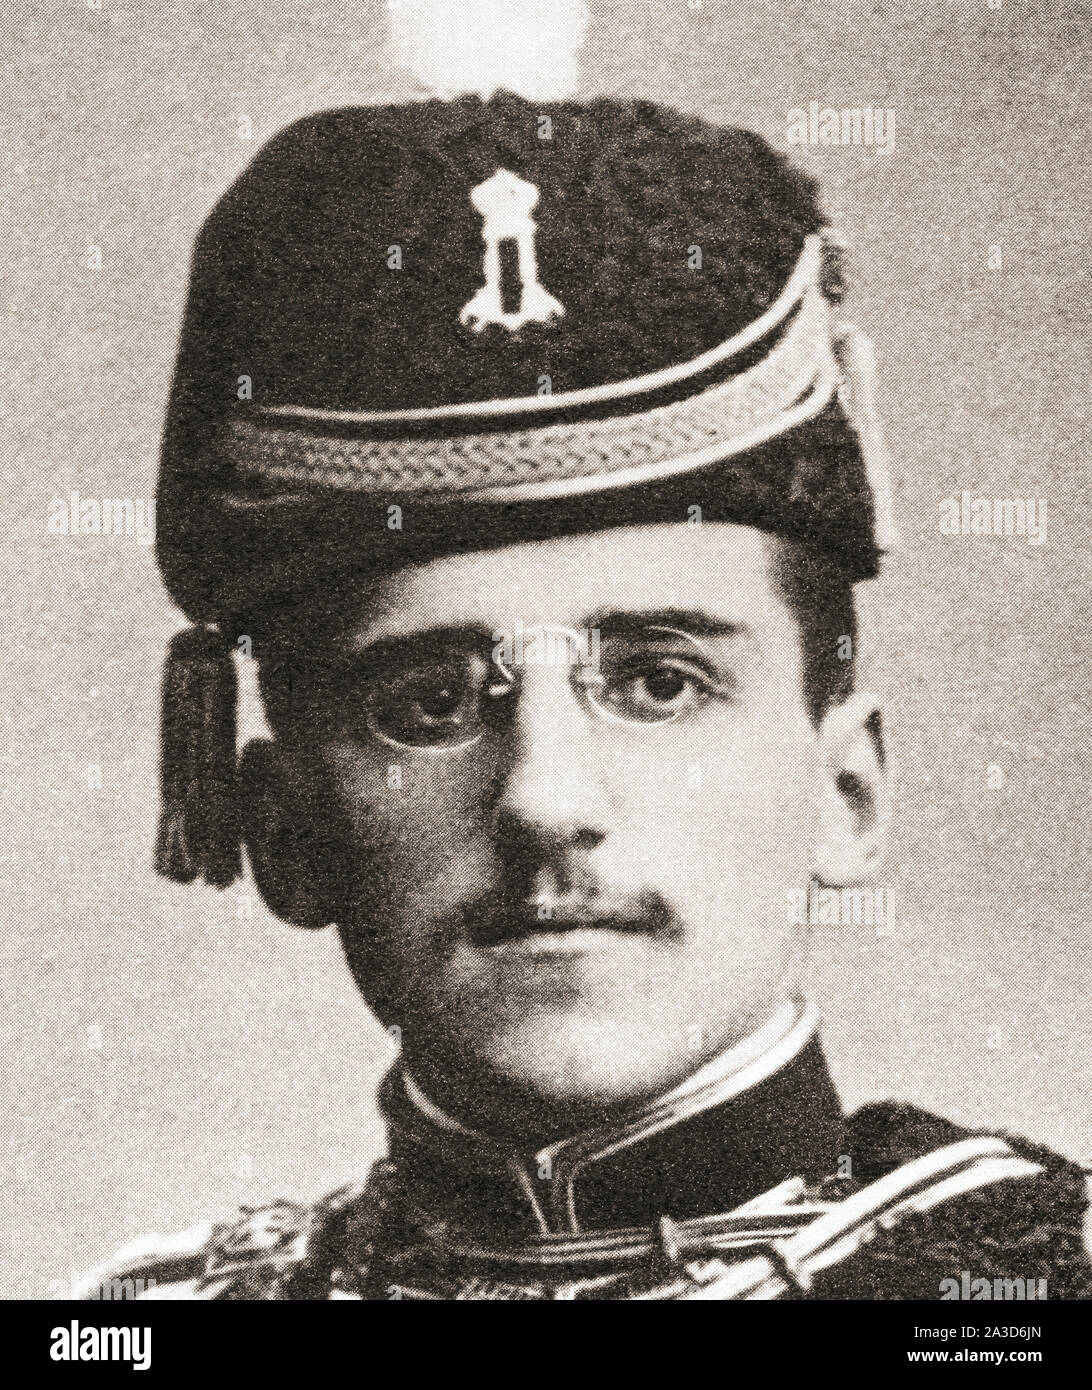 Alexander I, 1888 - 1934, aka Alexander the Unifier.  Prince regent of the Kingdom of Serbia from 1914 and later King of Yugoslavia.  From The Pageant of the Century, published 1934. Stock Photo